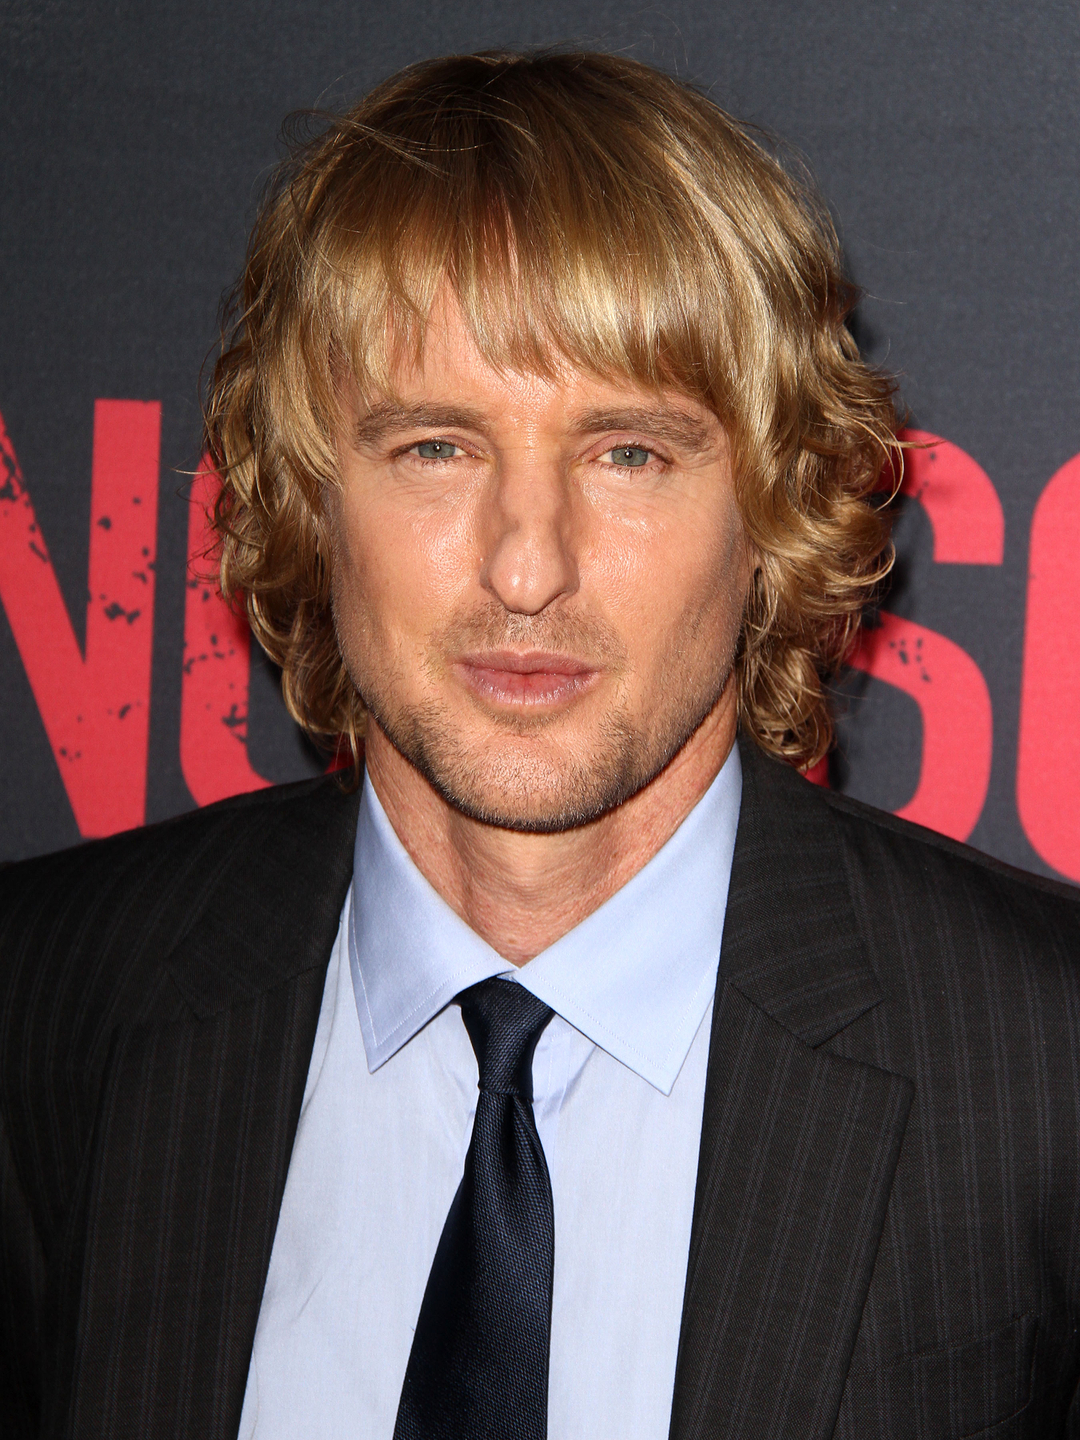 Owen Wilson who is his mother